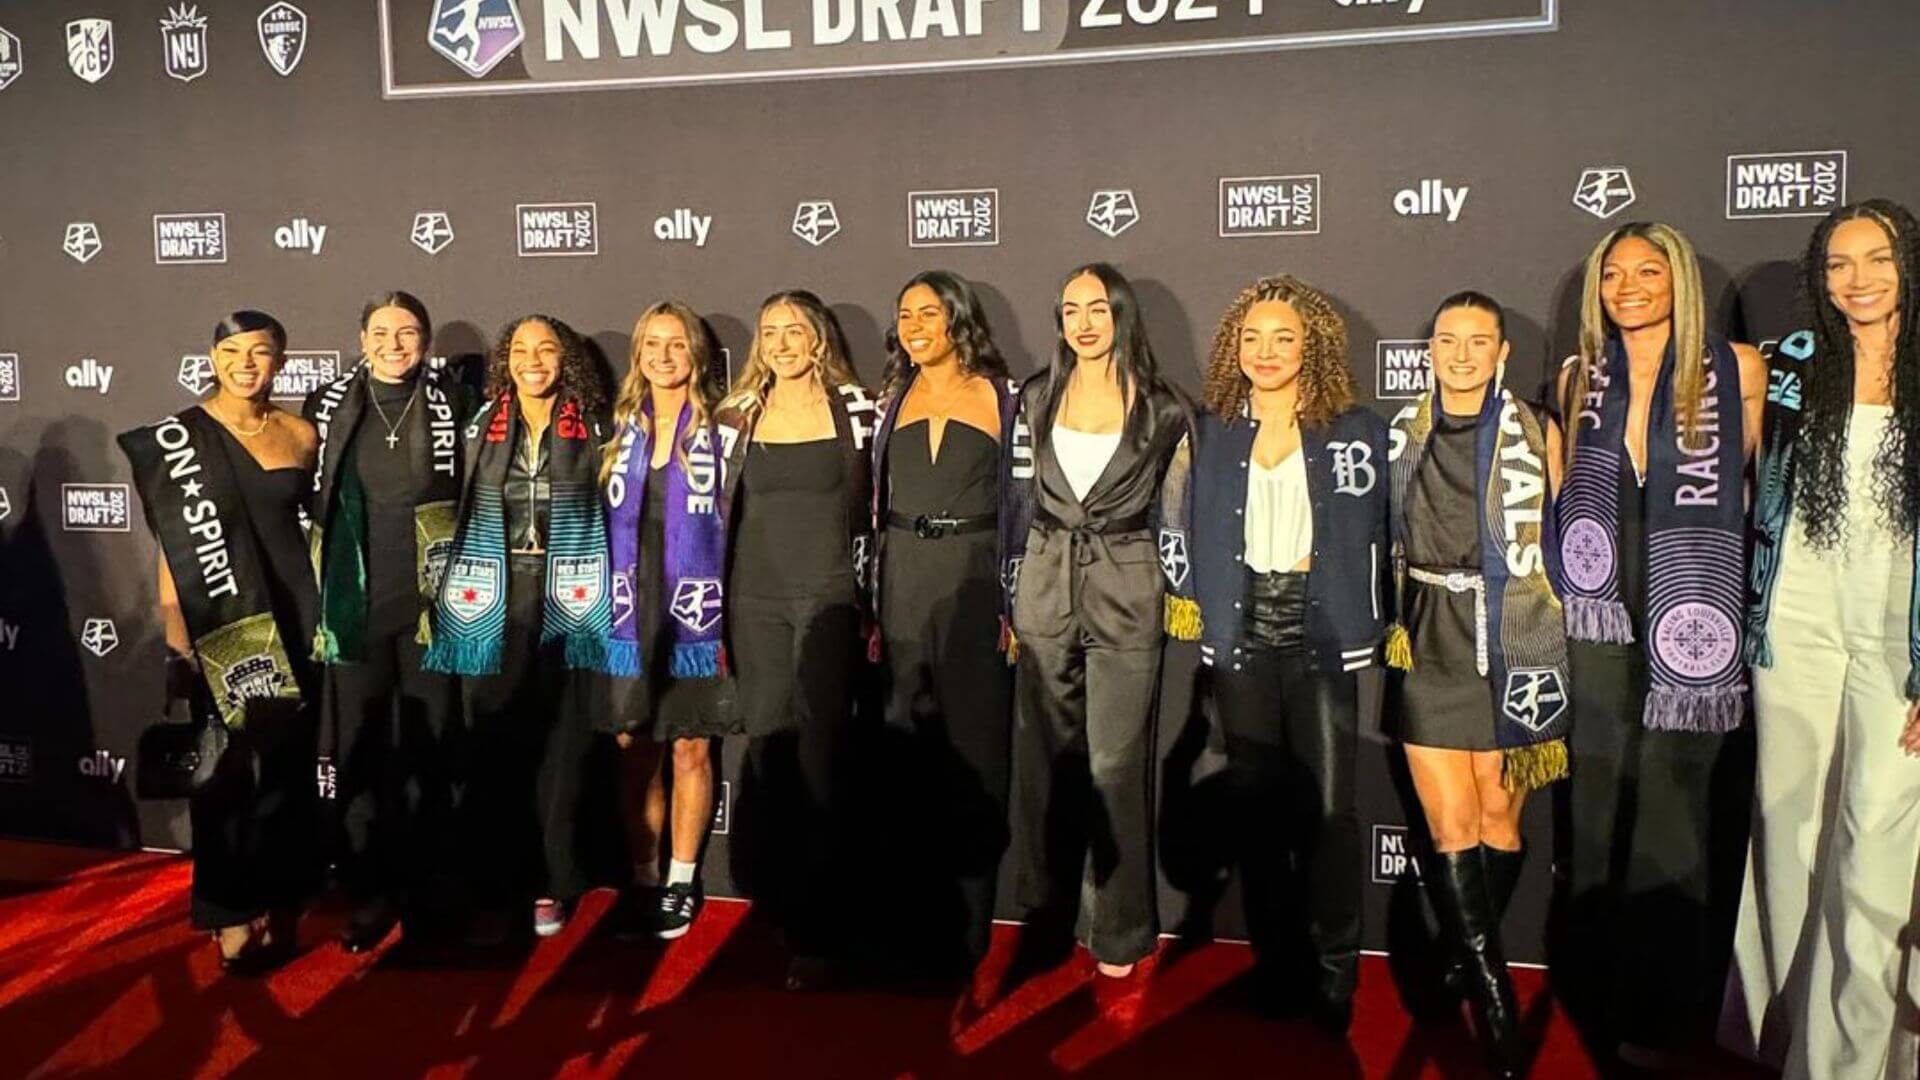 The NWSL Draft